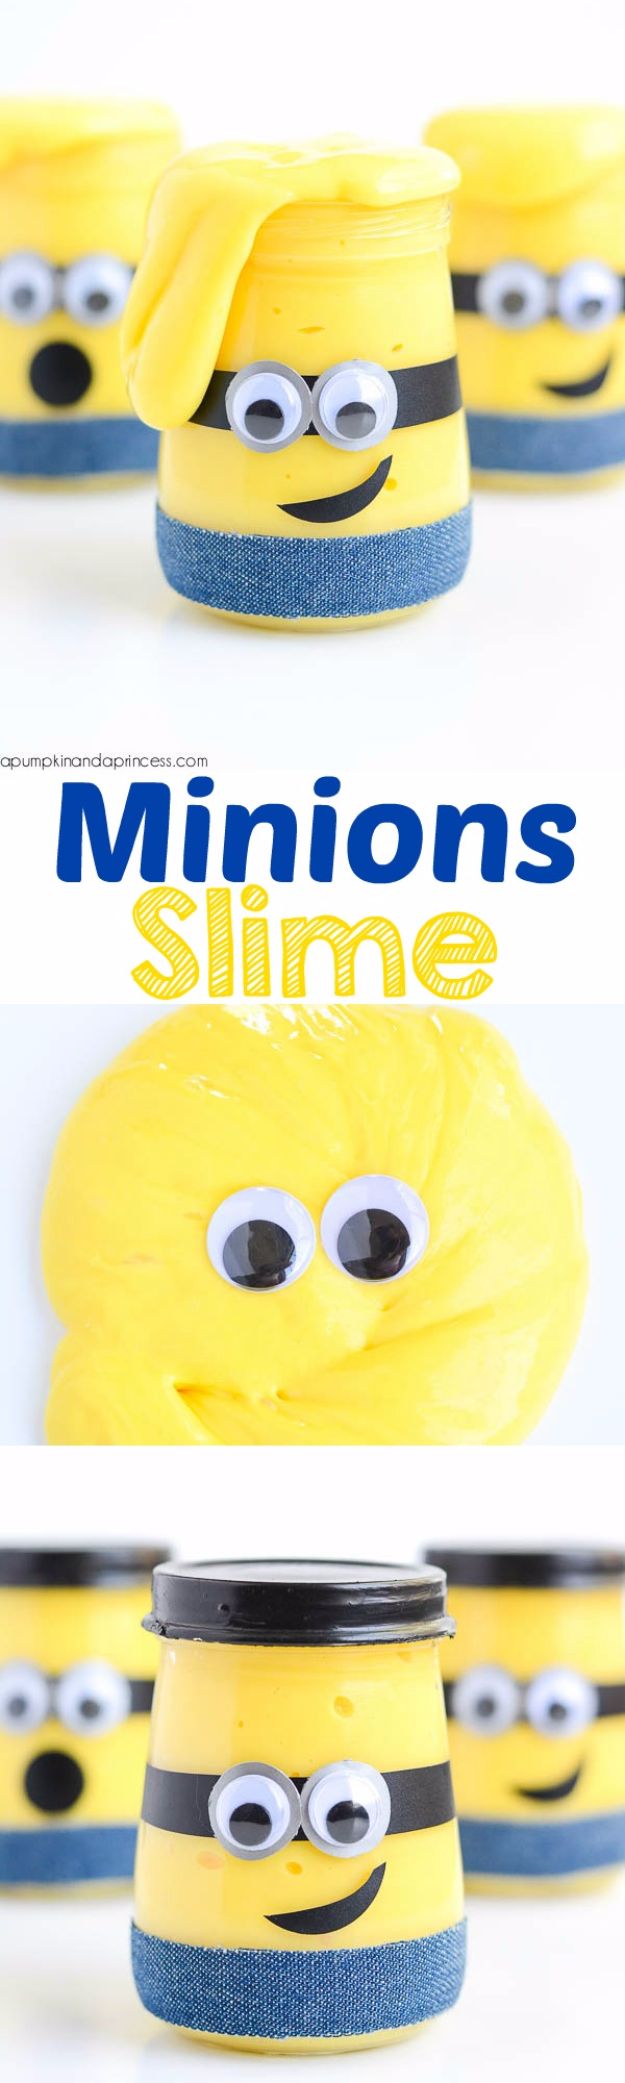 Best DIY Slime Recipes - Minions Slime - Cool and Easy Slime Recipe and Tutorials - Ideas Without Glue, Without Borax, For Kids, With Liquid Starch, Cornstarch and Laundry Detergent - How to Make Slime at Home - Fun Crafts and DIY Projects for Teens, Kids, Teenagers and Teens - Galaxy and Glitter Slime, Edible Slime, Rainbow Colored Slime, Shaving Cream recipes and more fun crafts and slimes #slimerecipes #slime #diyslime #teencrafts